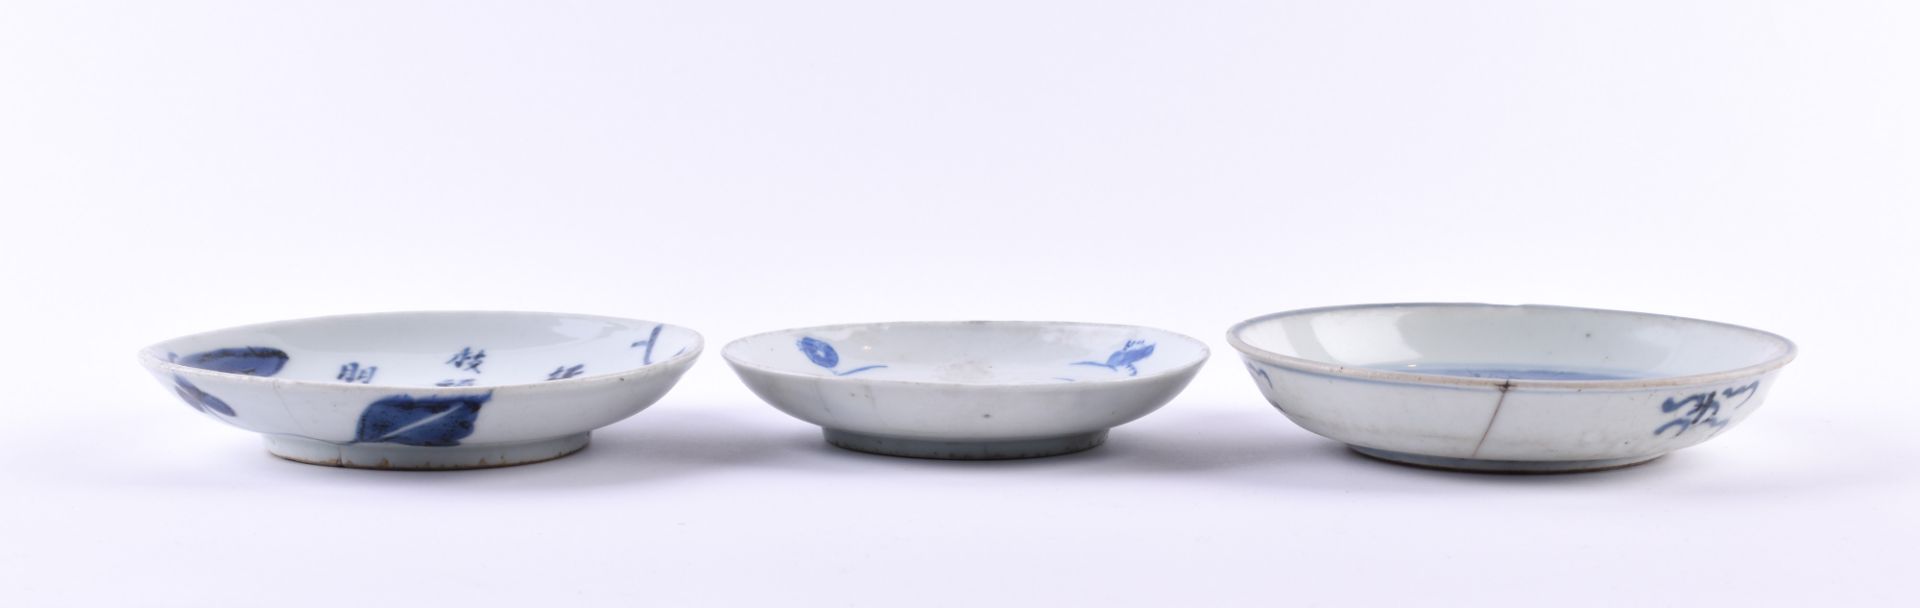  A group of Asian porcelain China Qing dynasty - Image 4 of 10